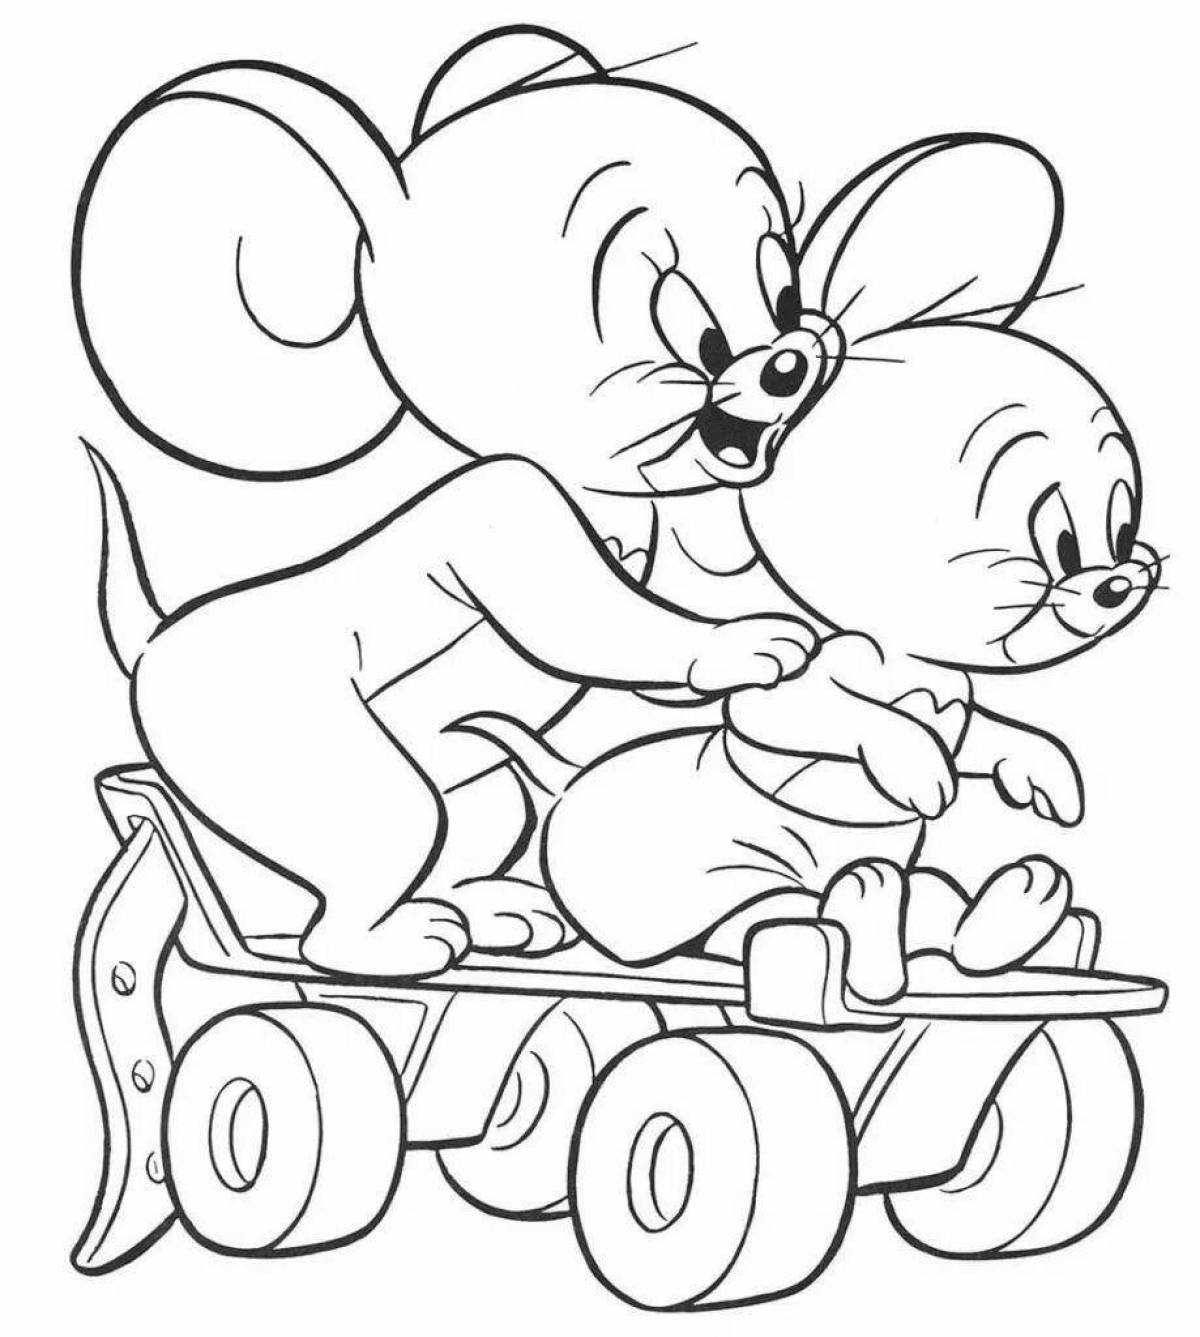 Color-frenzy coloring page for kids 4-5 years old